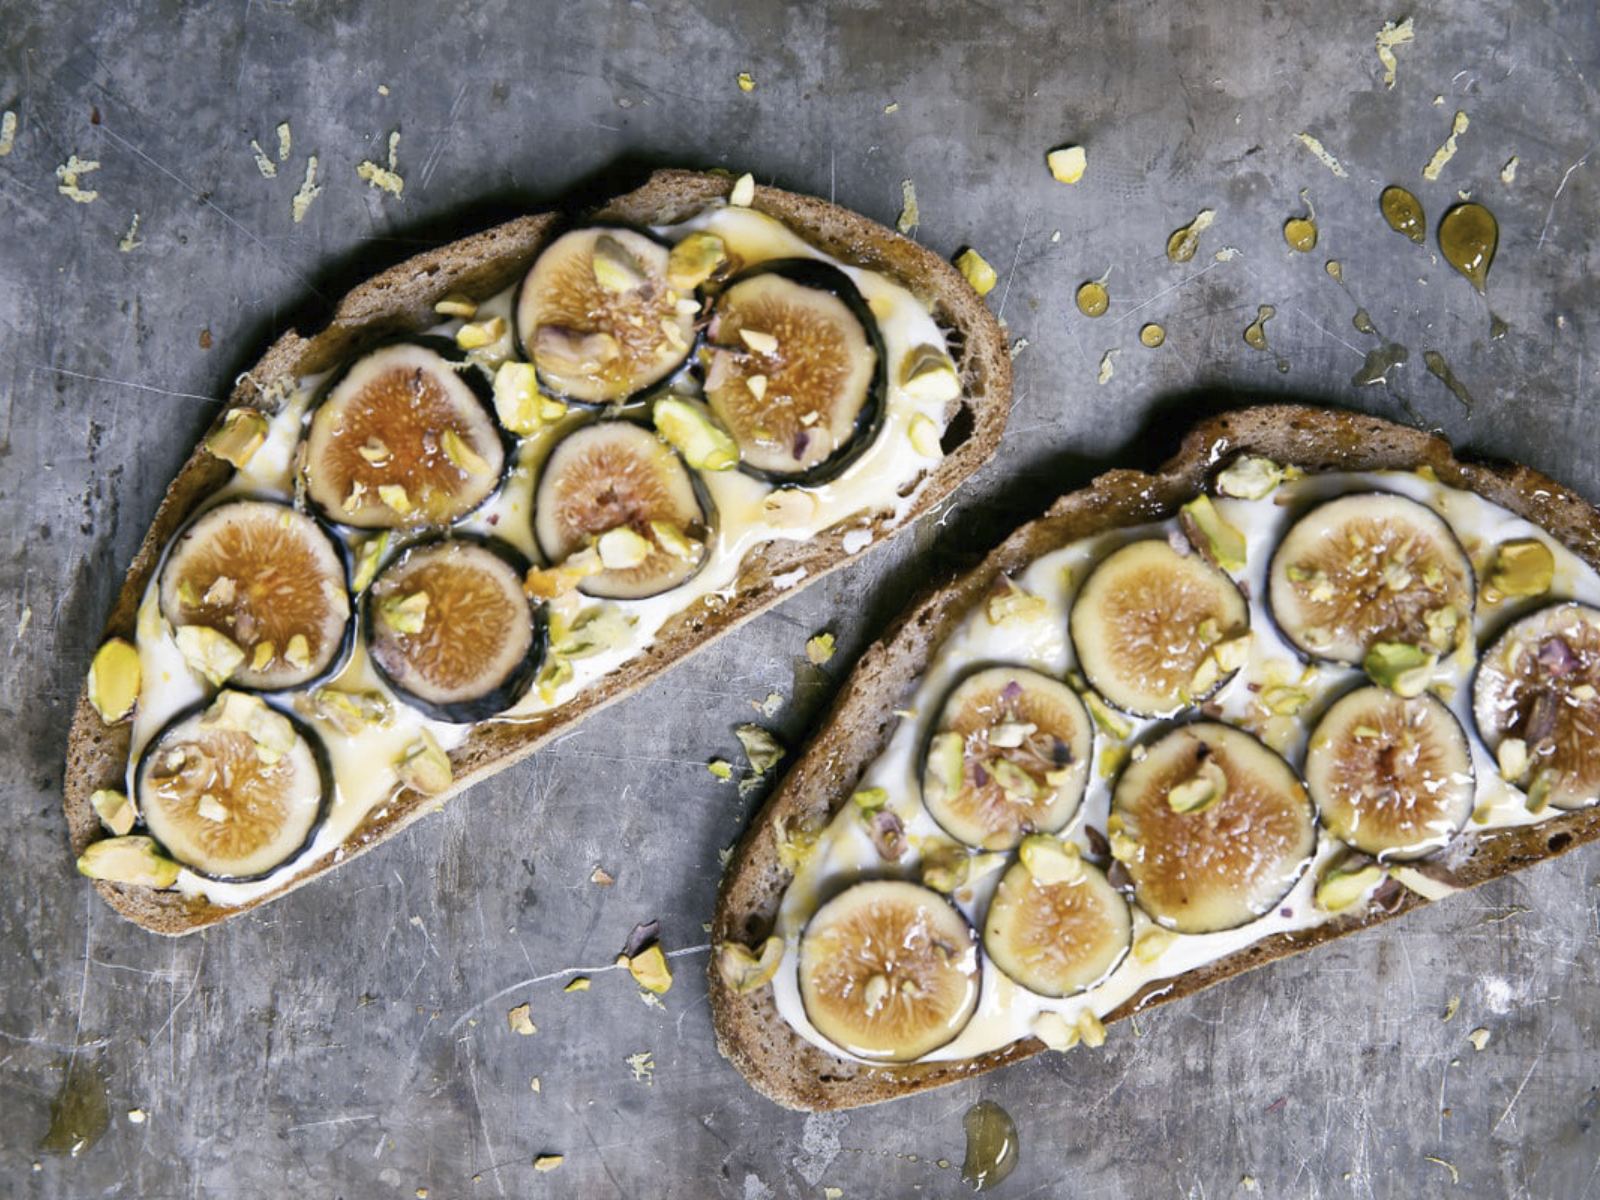 Honey-Lemon Ricotta Breakfast Toast with Figs and Pistachios